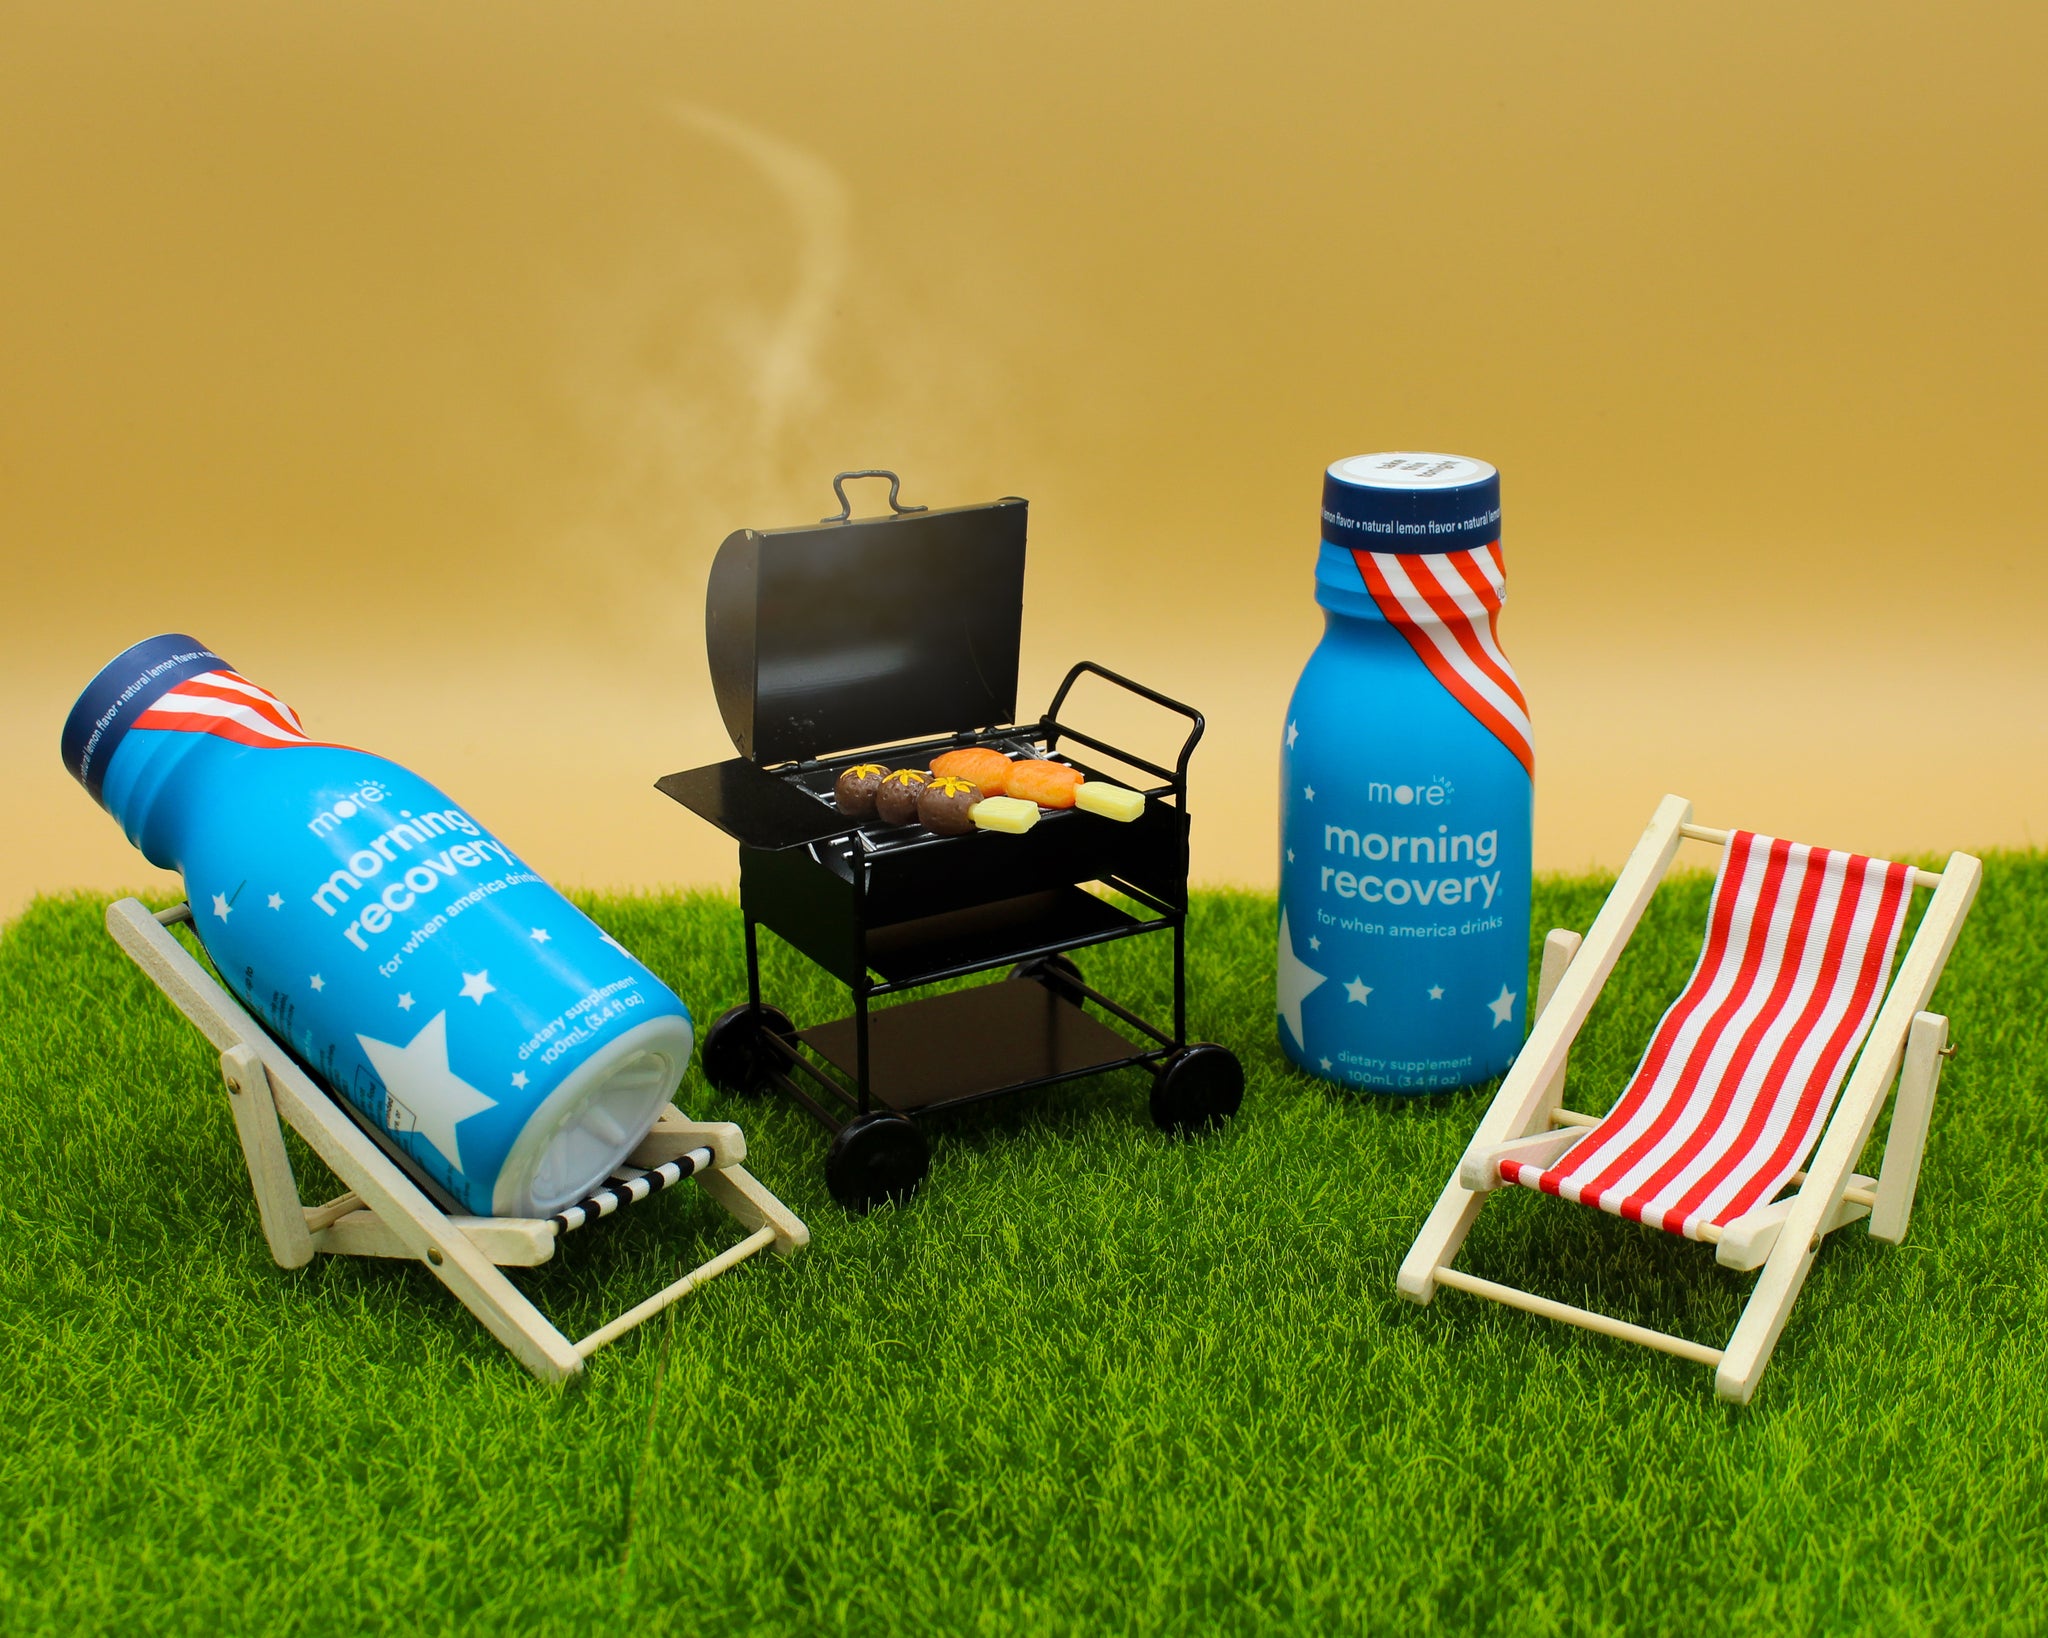 4 reasons you need Morning Recovery at your Fourth of July party.